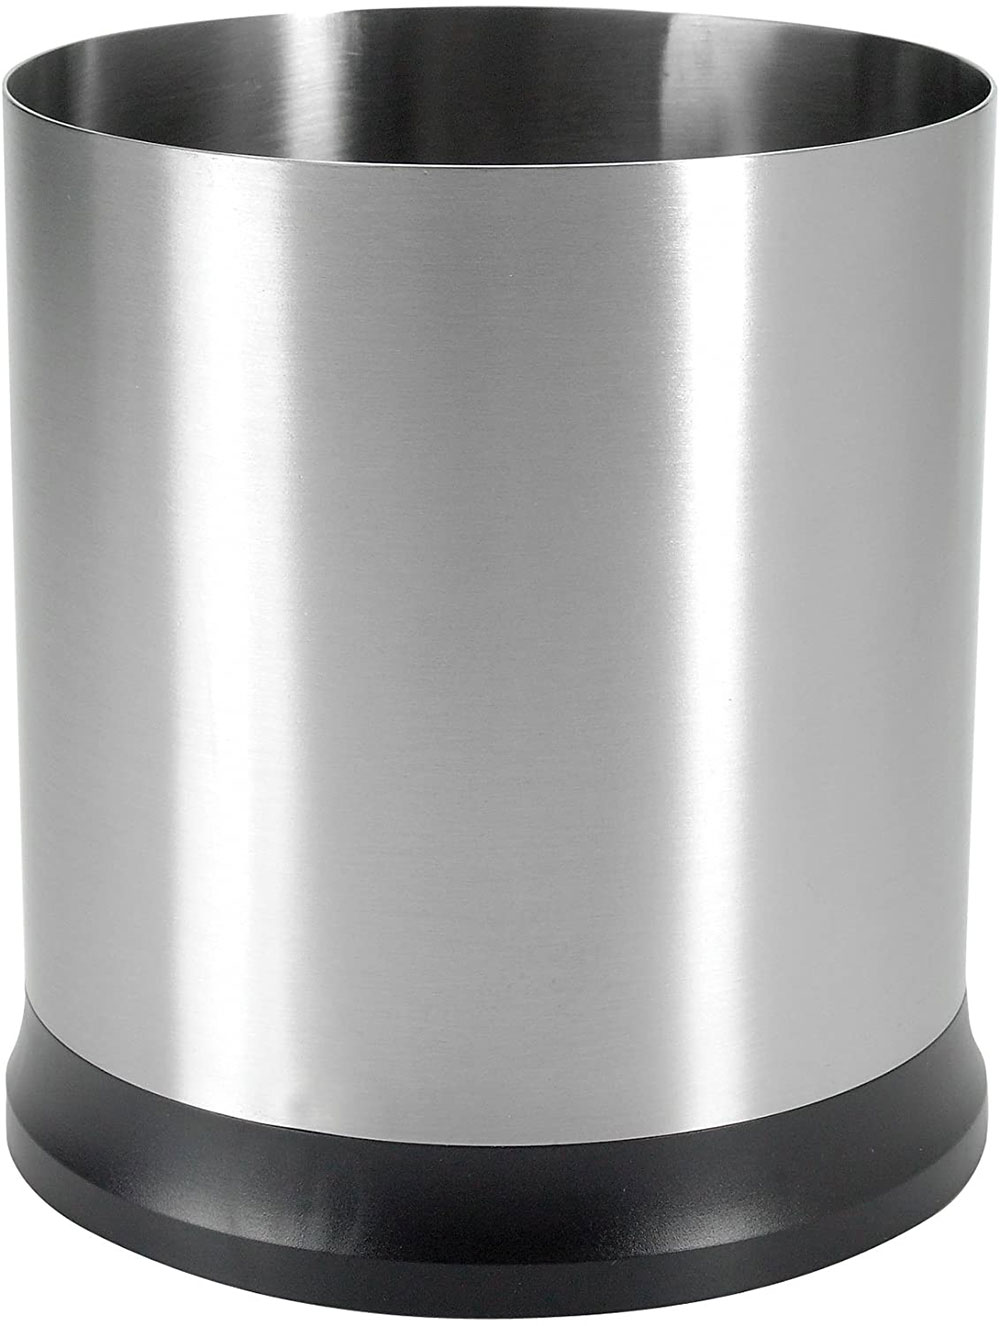 OXO Good Grips Stainless Steel Rotating Utensil Holder What is the best kitchen utensil holder out there?